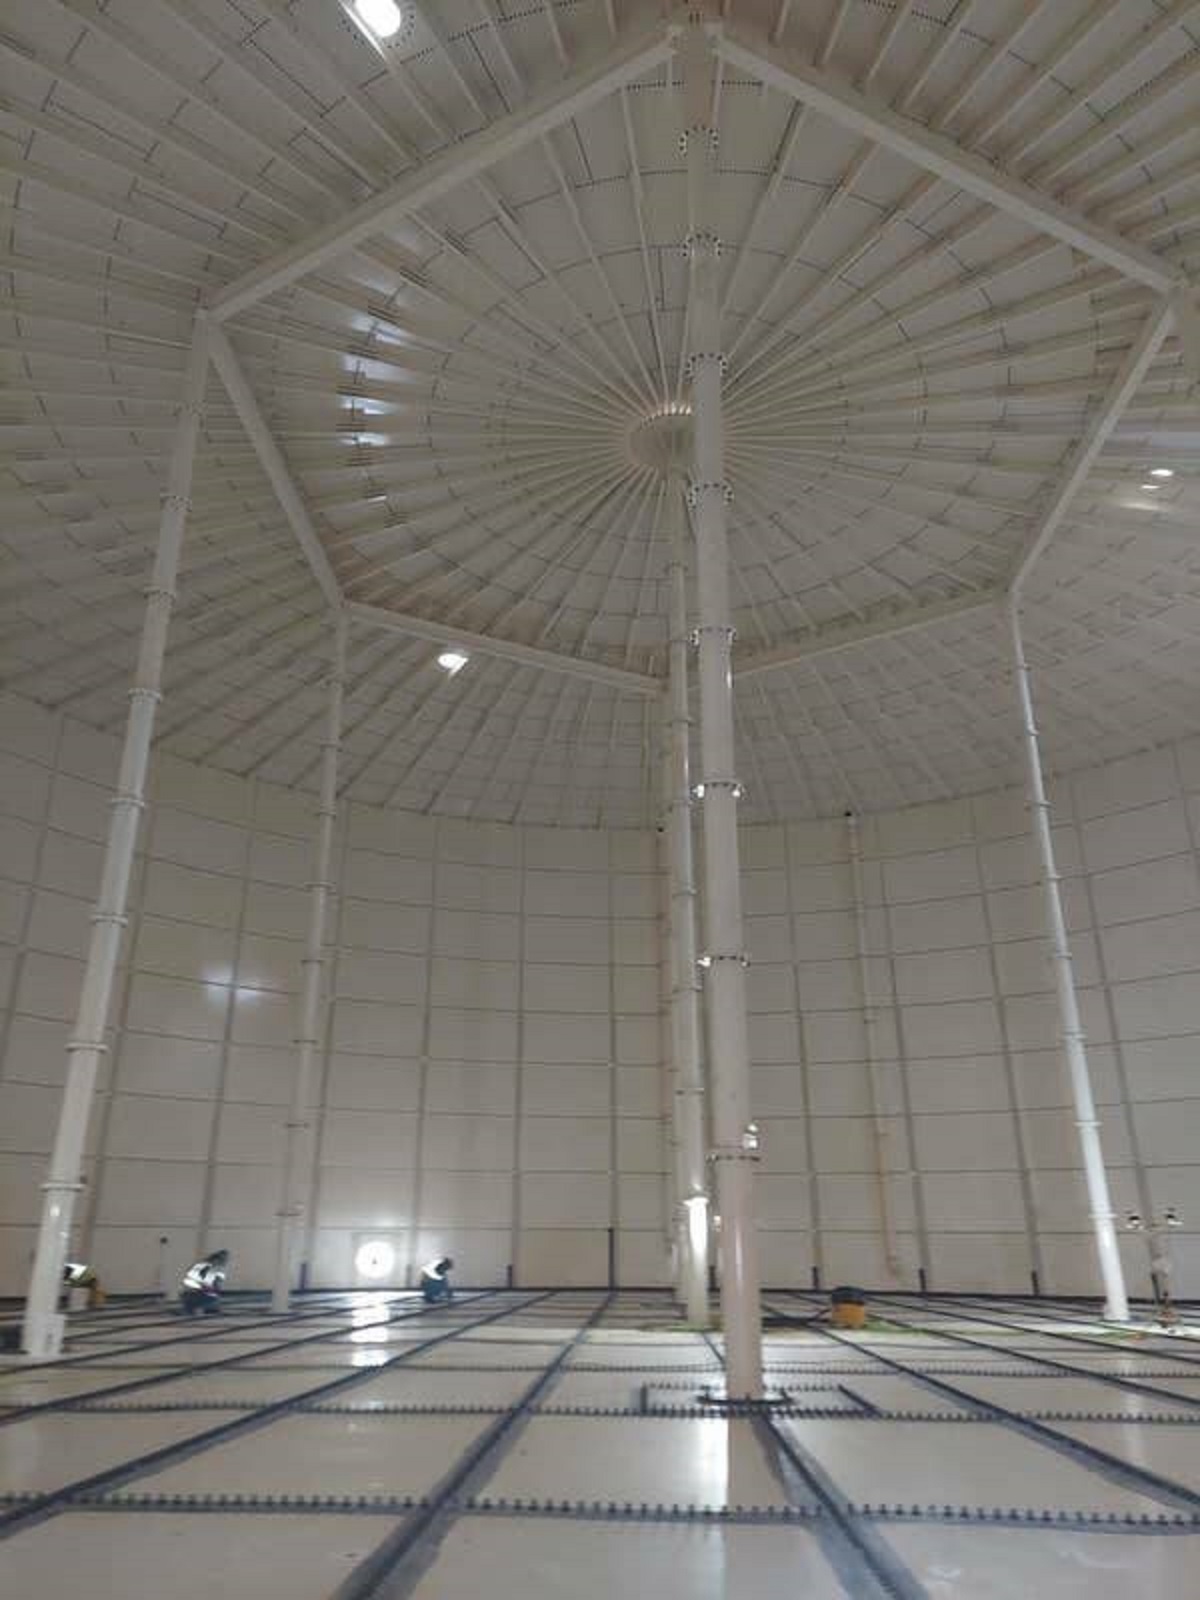 This is what the inside of a 3 million–gallon water tank looks like: